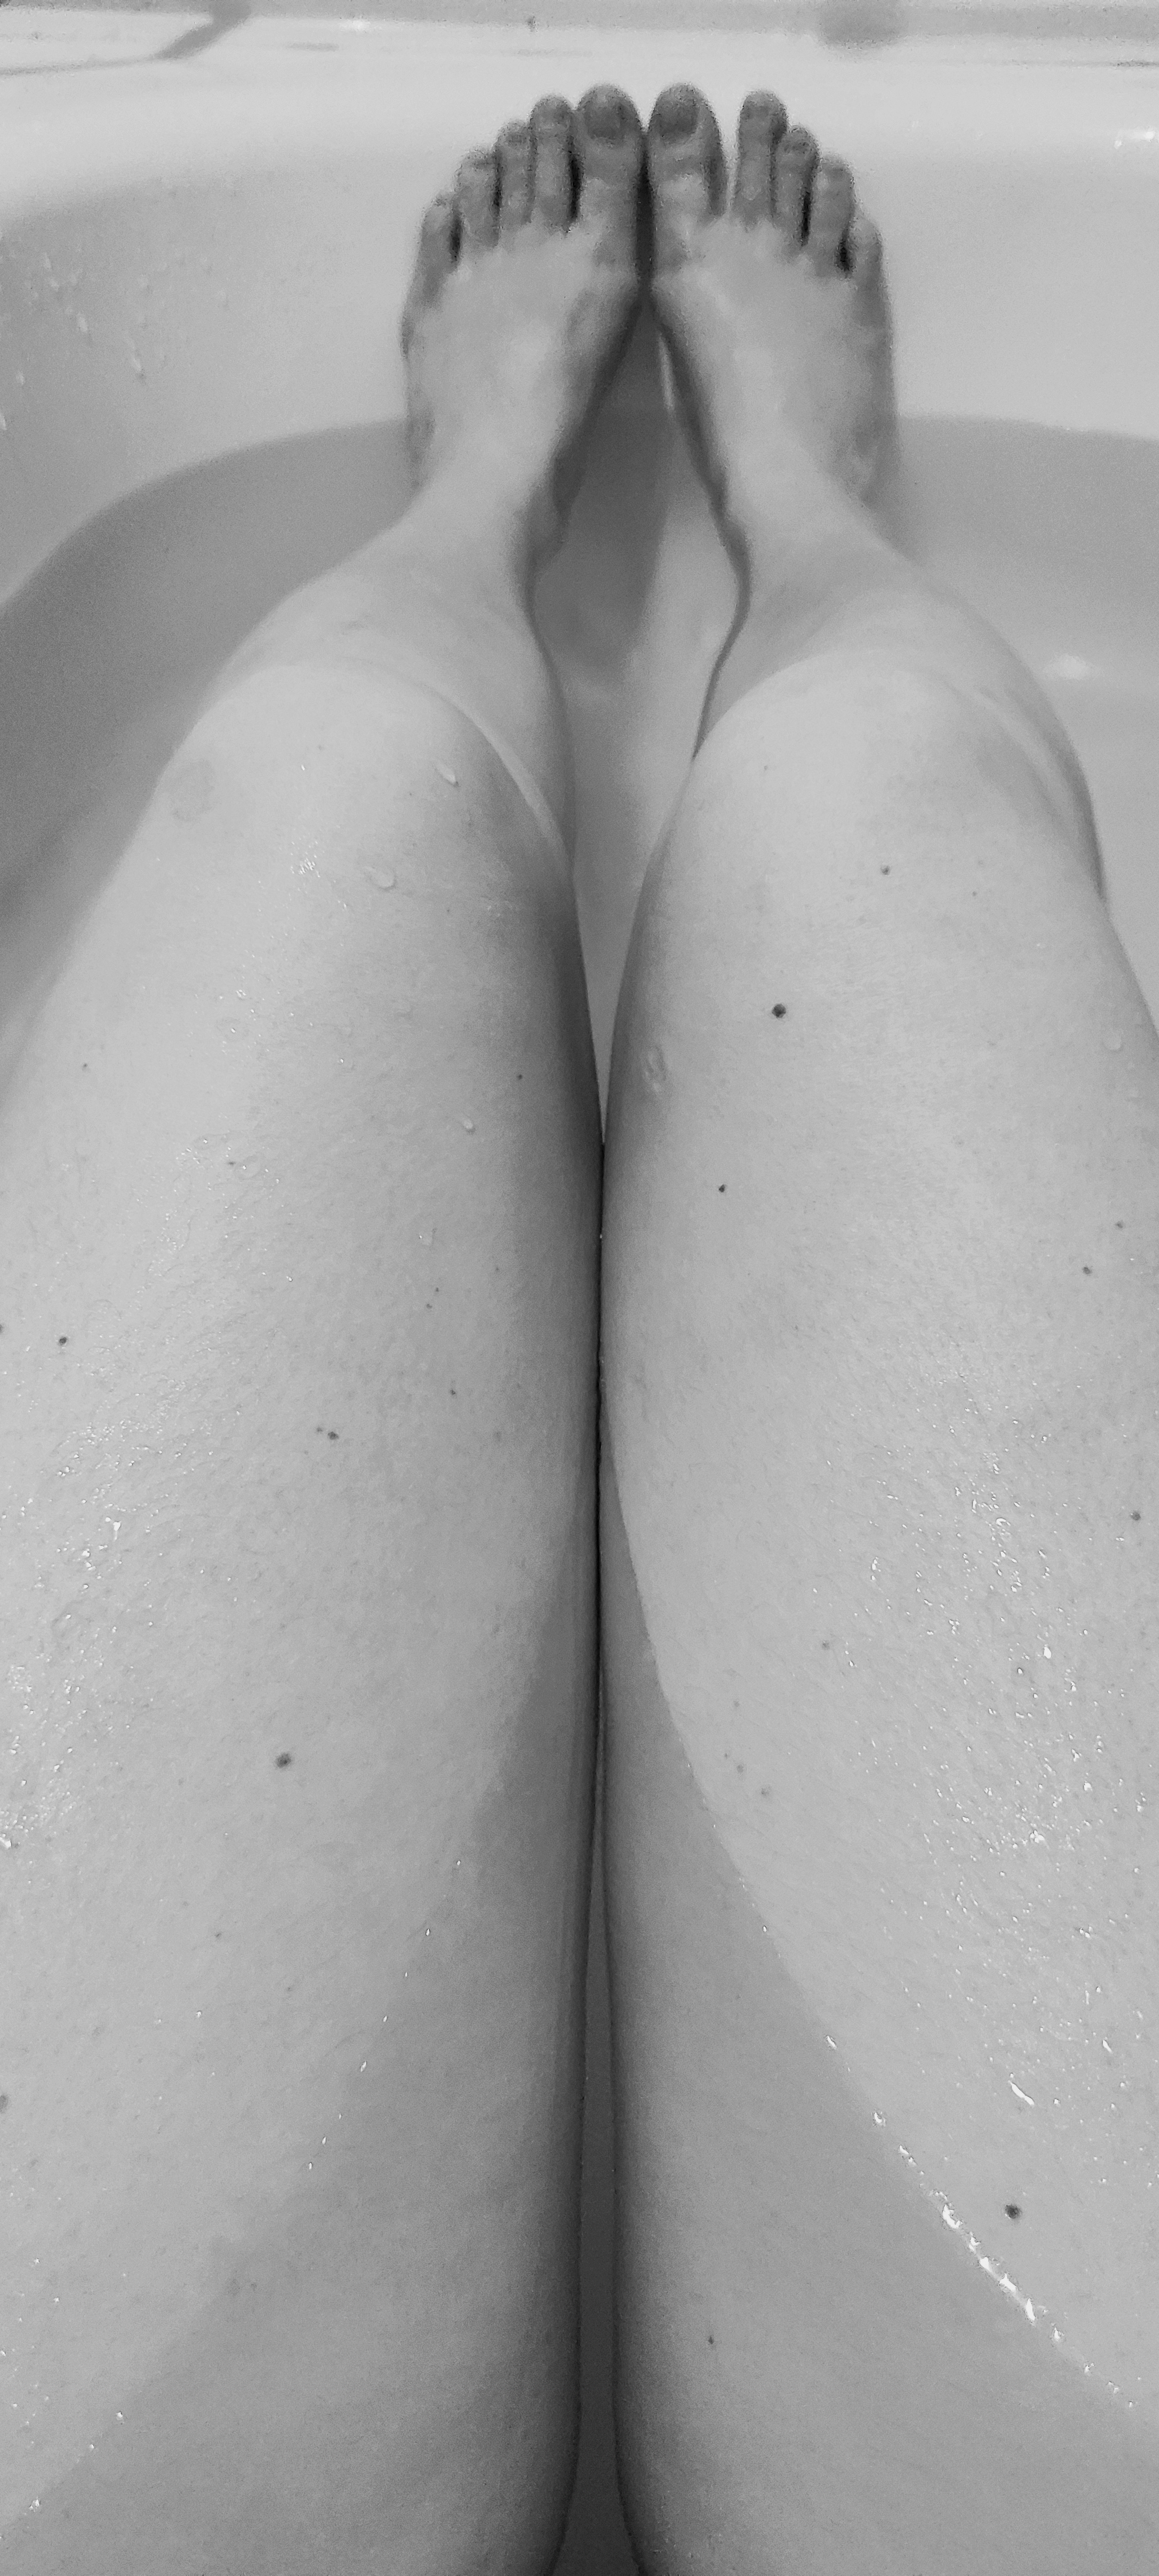 Photodefloration ... - NSFW, My, Homemade, Bath, First time, Longpost, Boobs, Foot fetish, No face